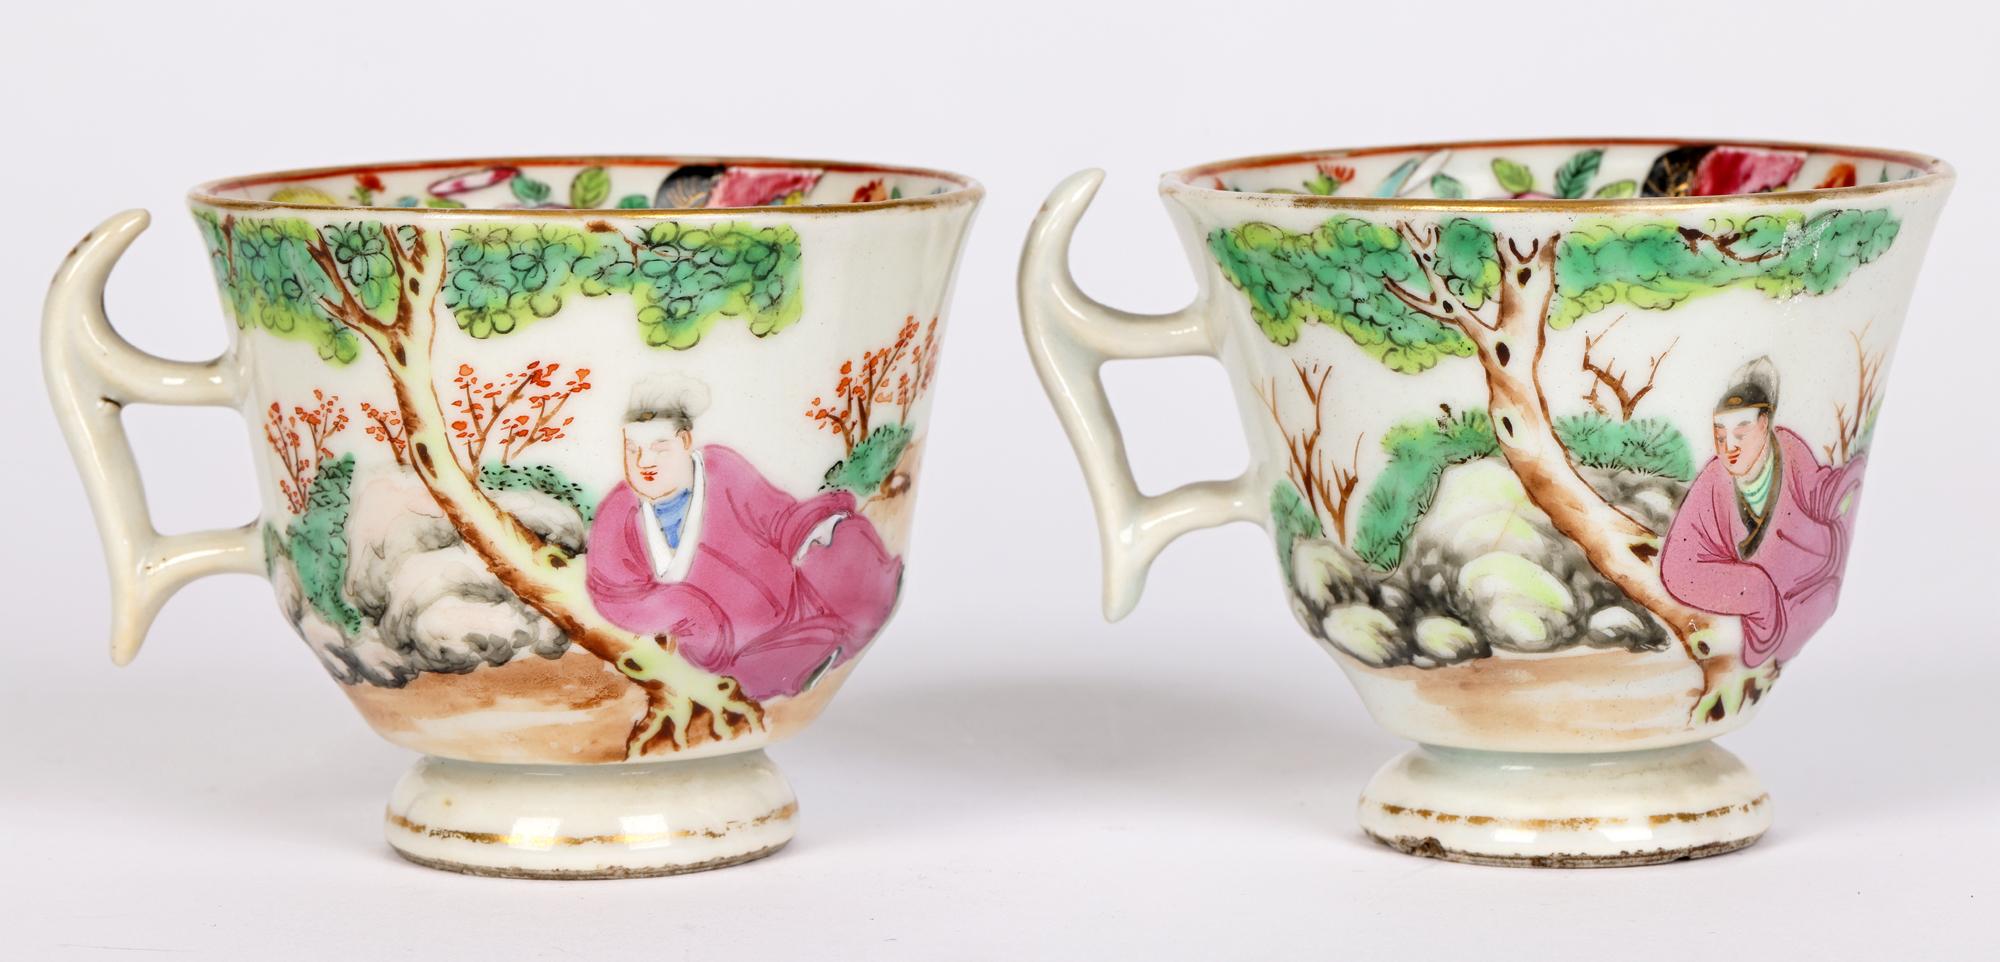 Swansea Welsh Pair Famille Rose Chinese Mandarin Pattern Porcelain Cups In Fair Condition For Sale In Bishop's Stortford, Hertfordshire